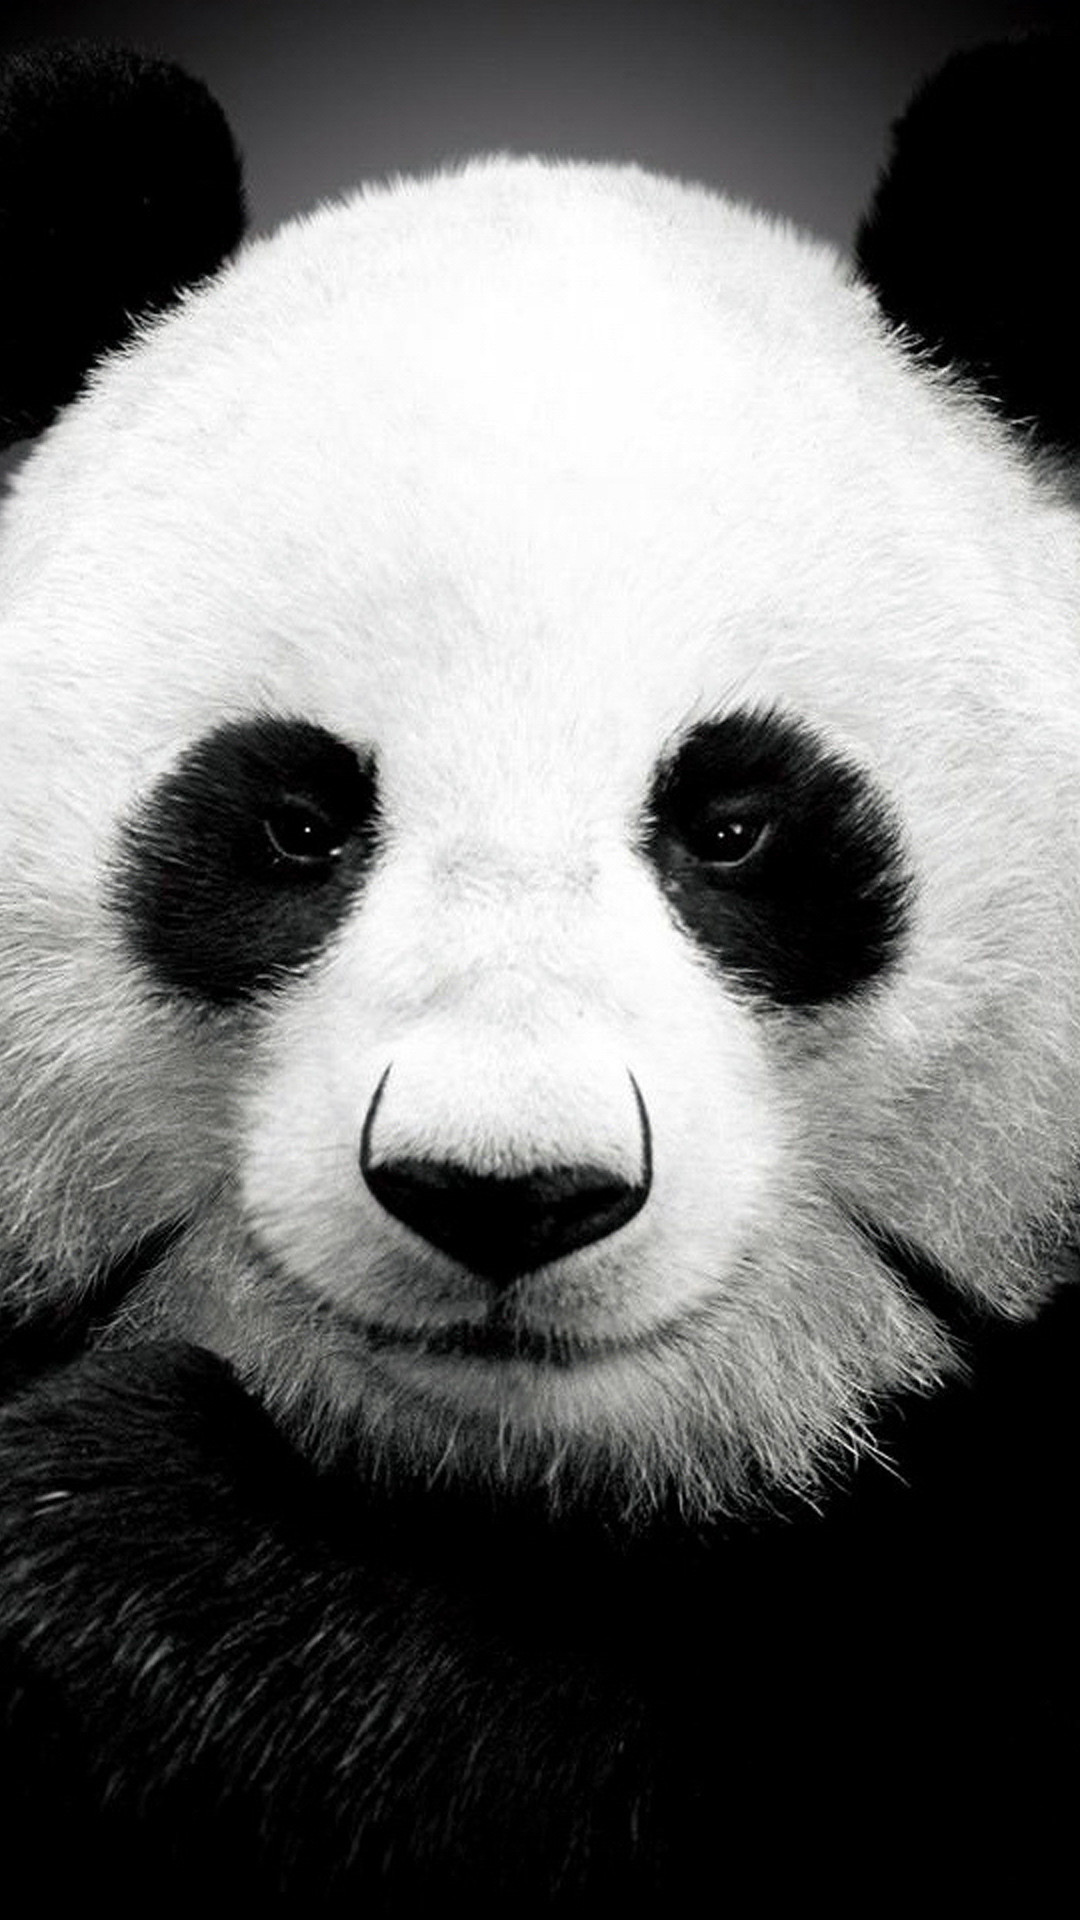 1080x1920 Panda bear Best htc one wallpapers and easy to download 